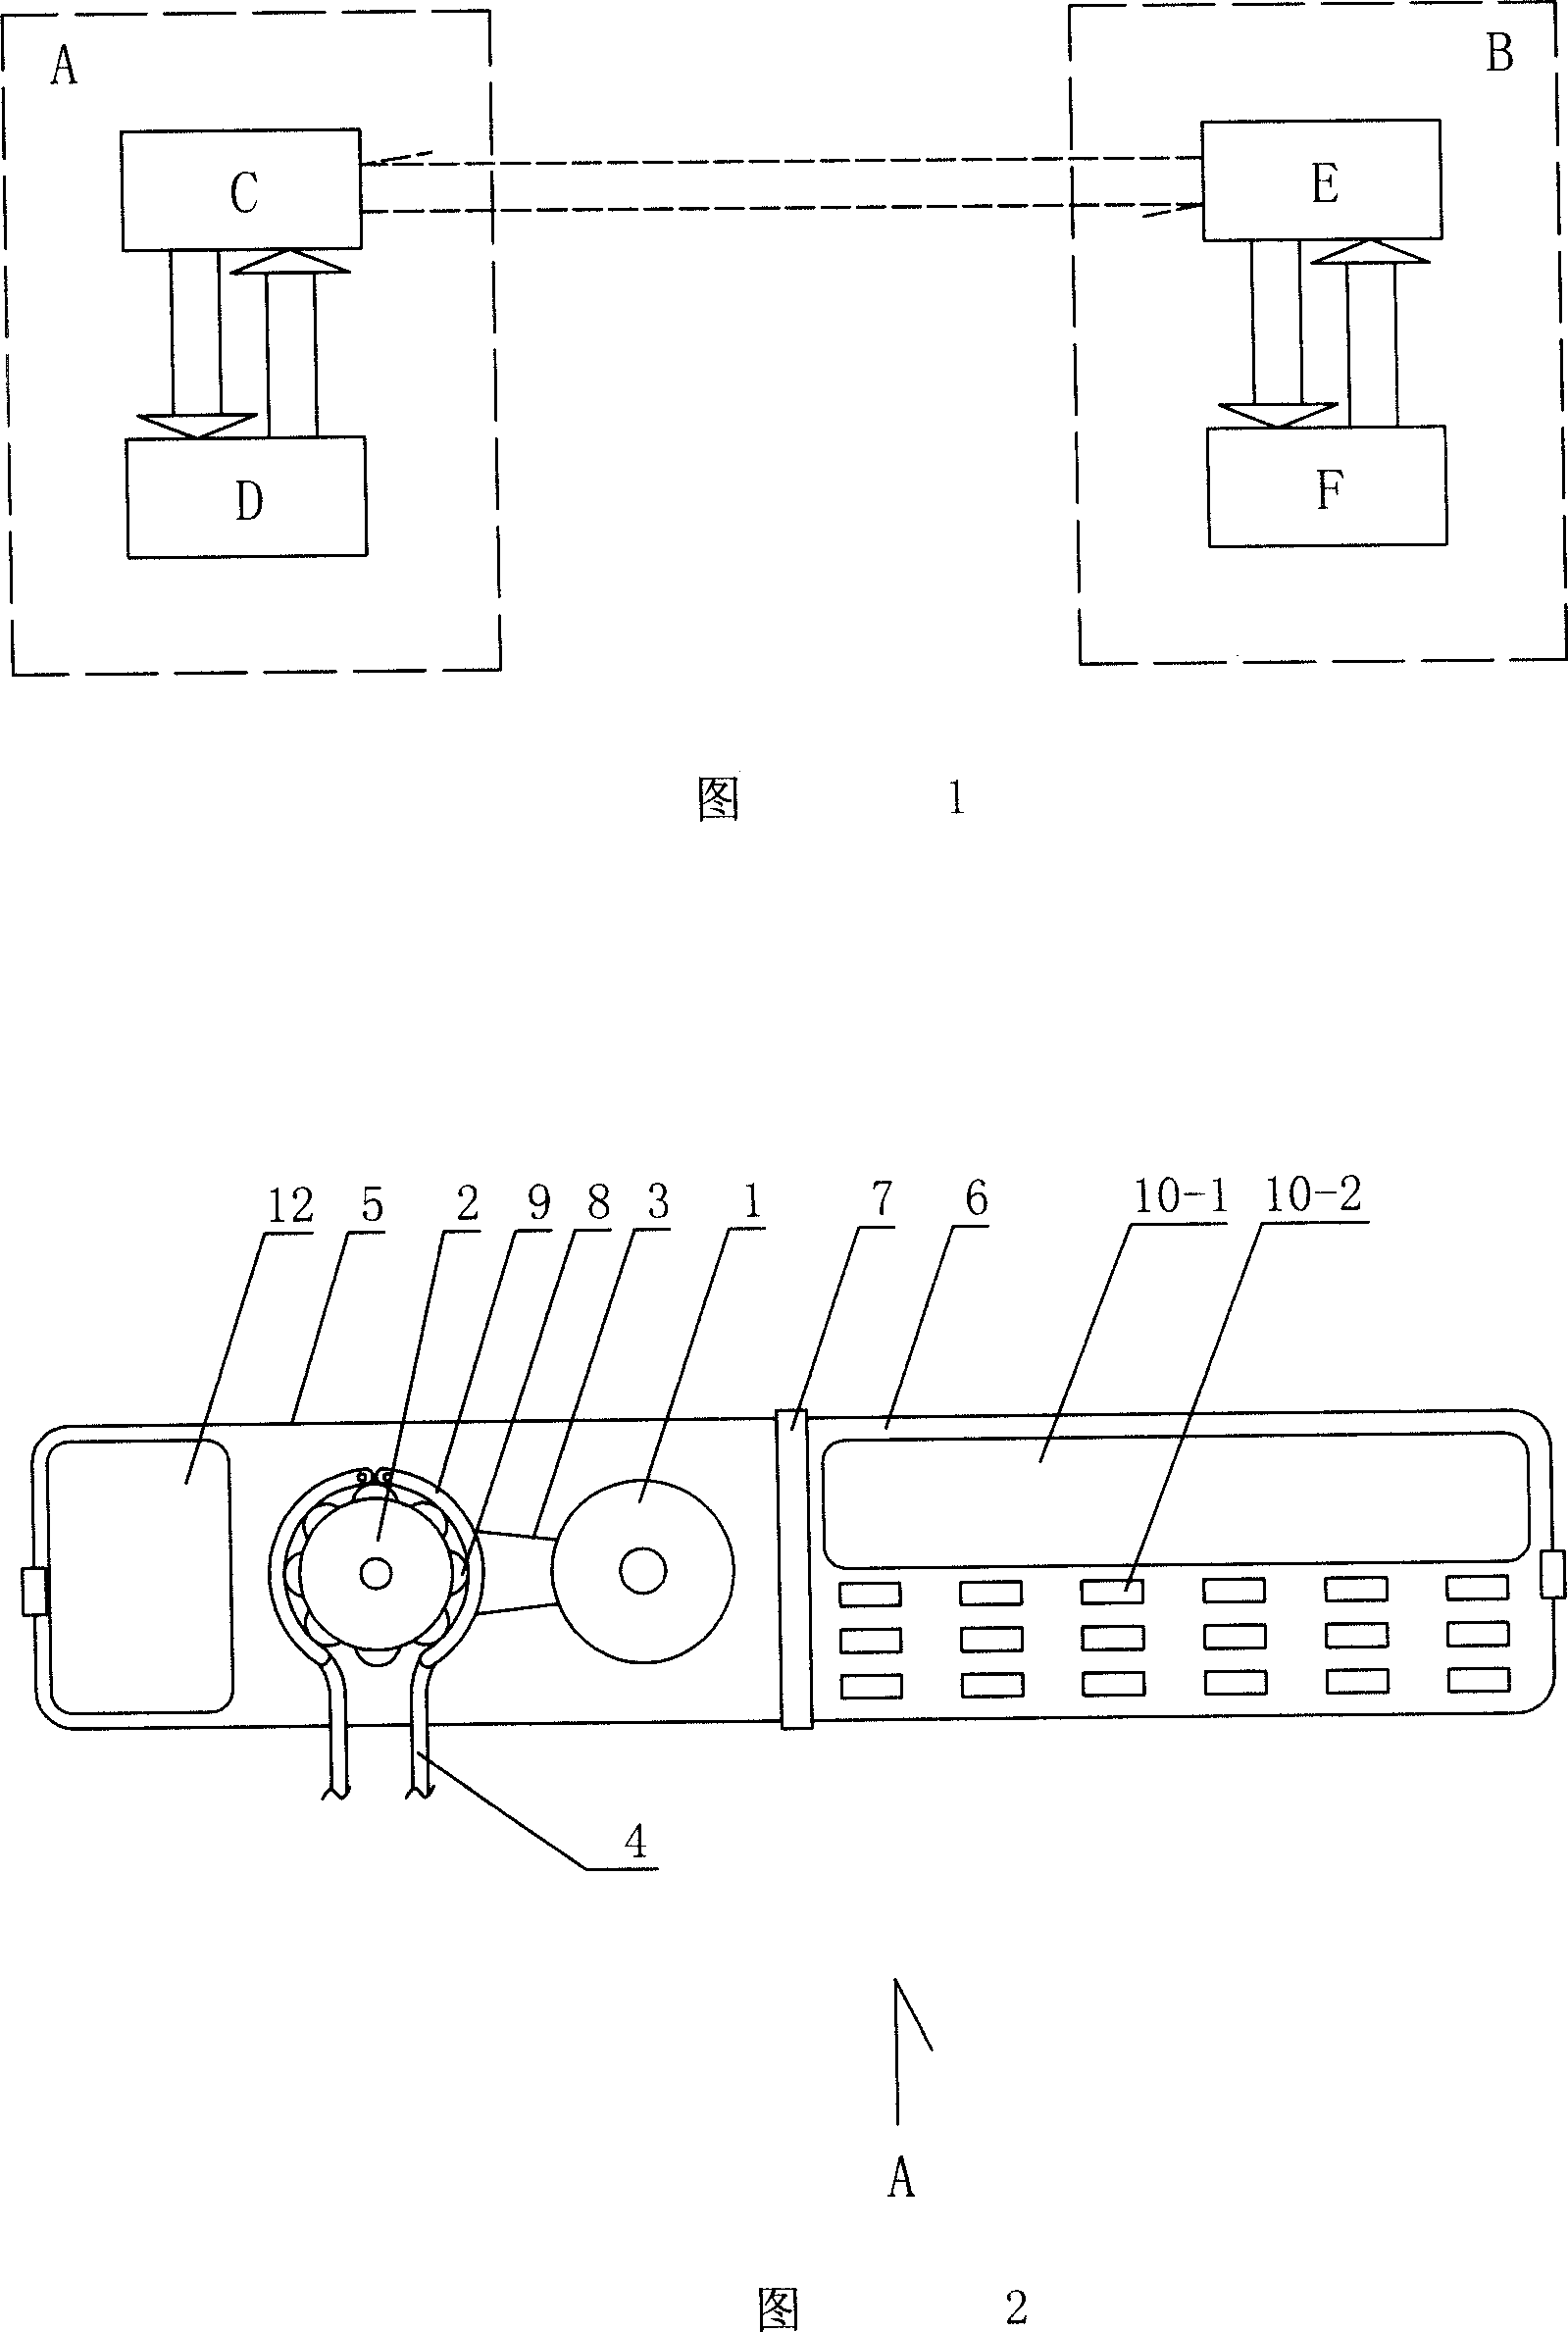 Control system for telecontrolled intelligent injection and transfusion set